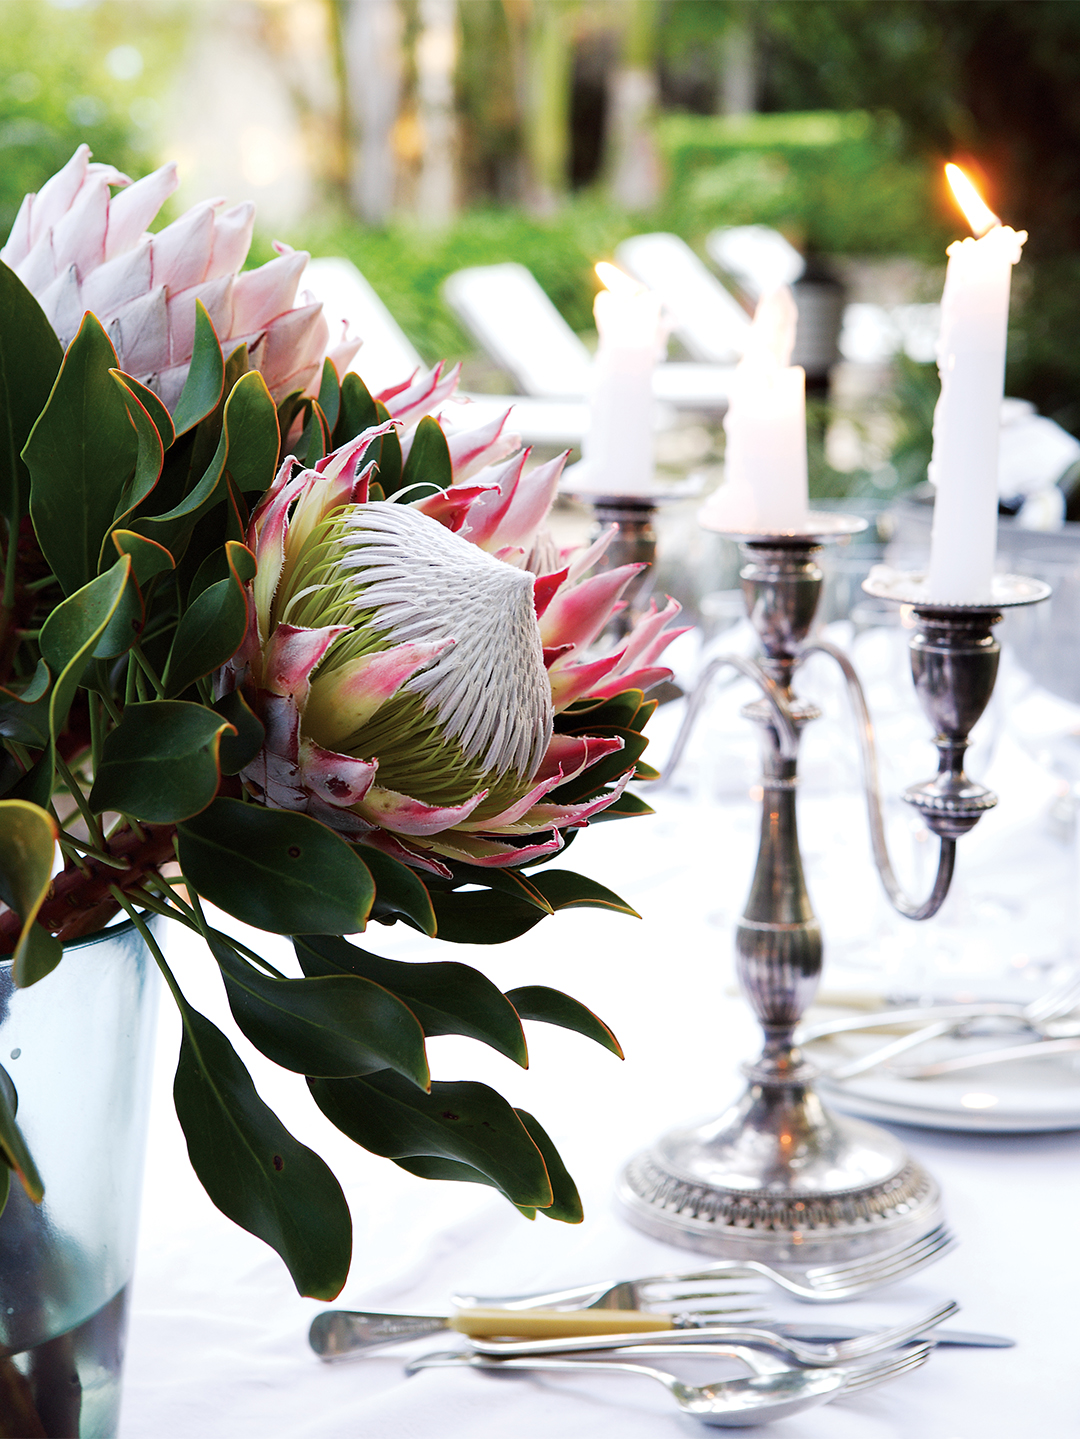 Table outdoors set for dinner with candles flickering and protea flowers in a vase.